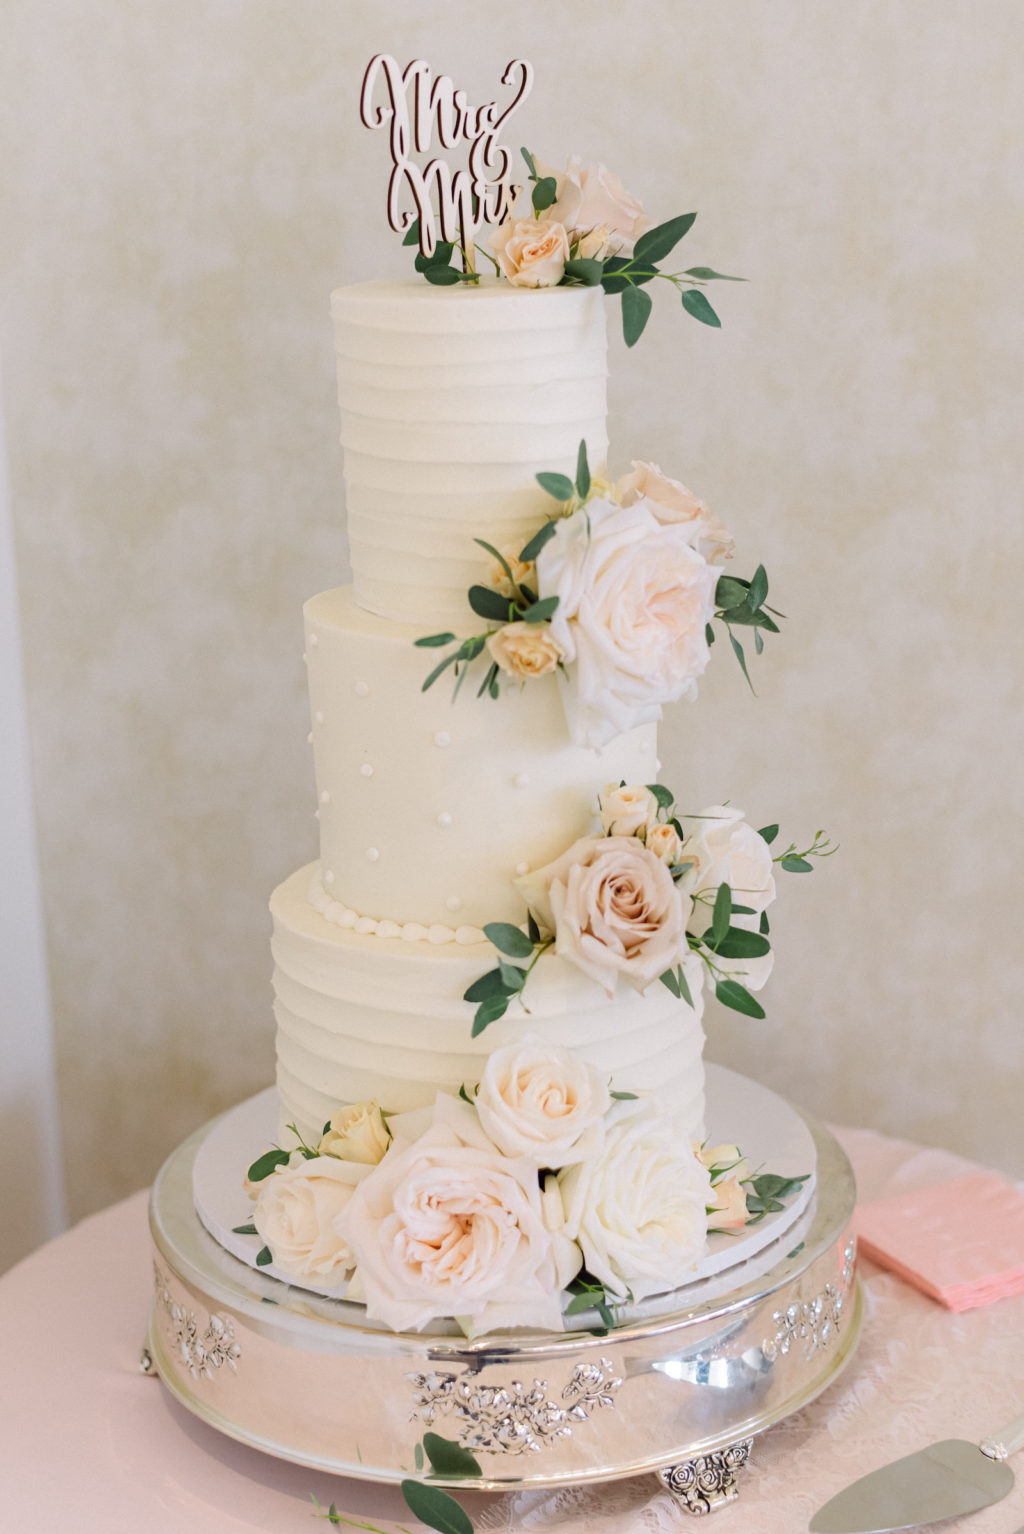 Three Tier Textured Wedding Cake with Blush Pink Roses and Custom Cake Topper